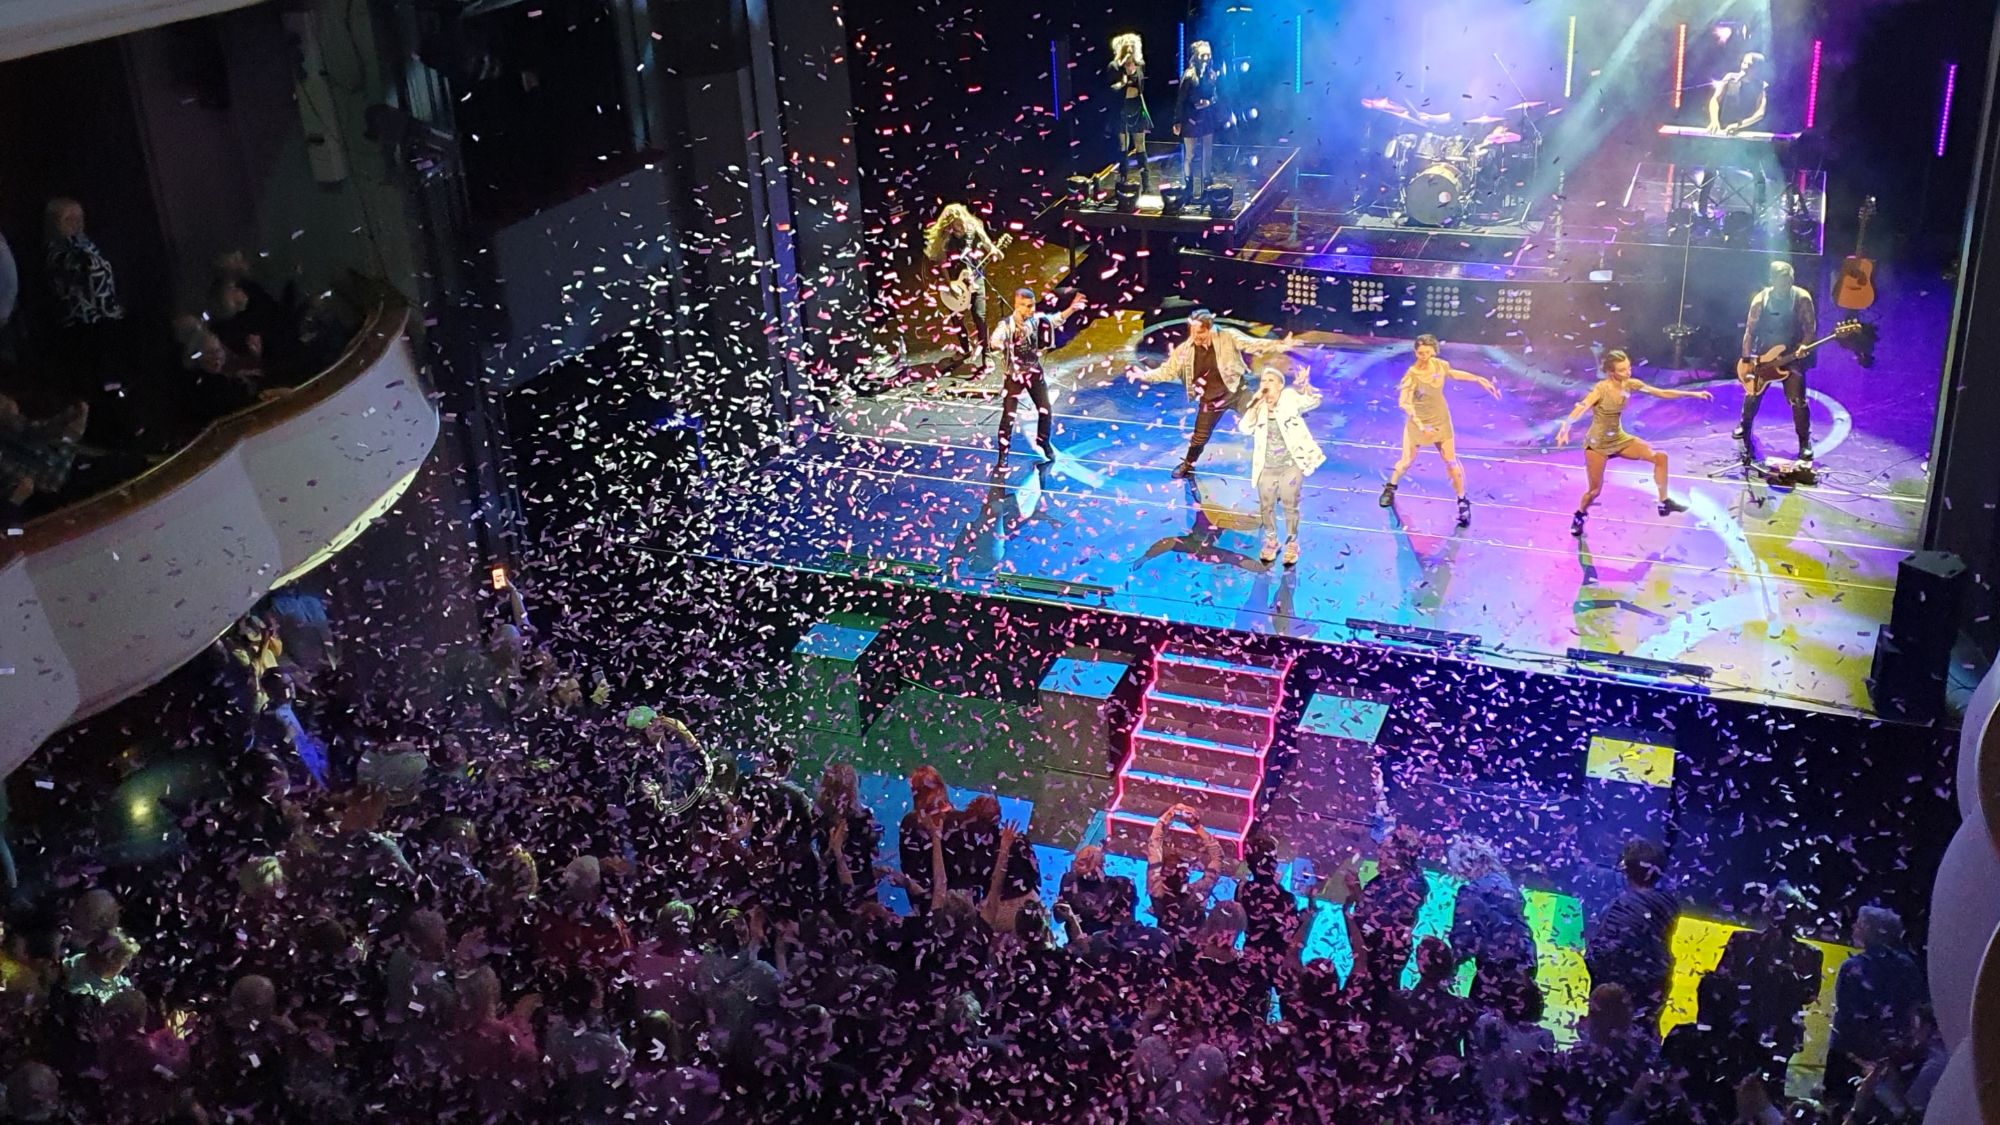 View from the balcony onto a theatre stage, P!NK tribute show, dancers and band, pink confetti in the air